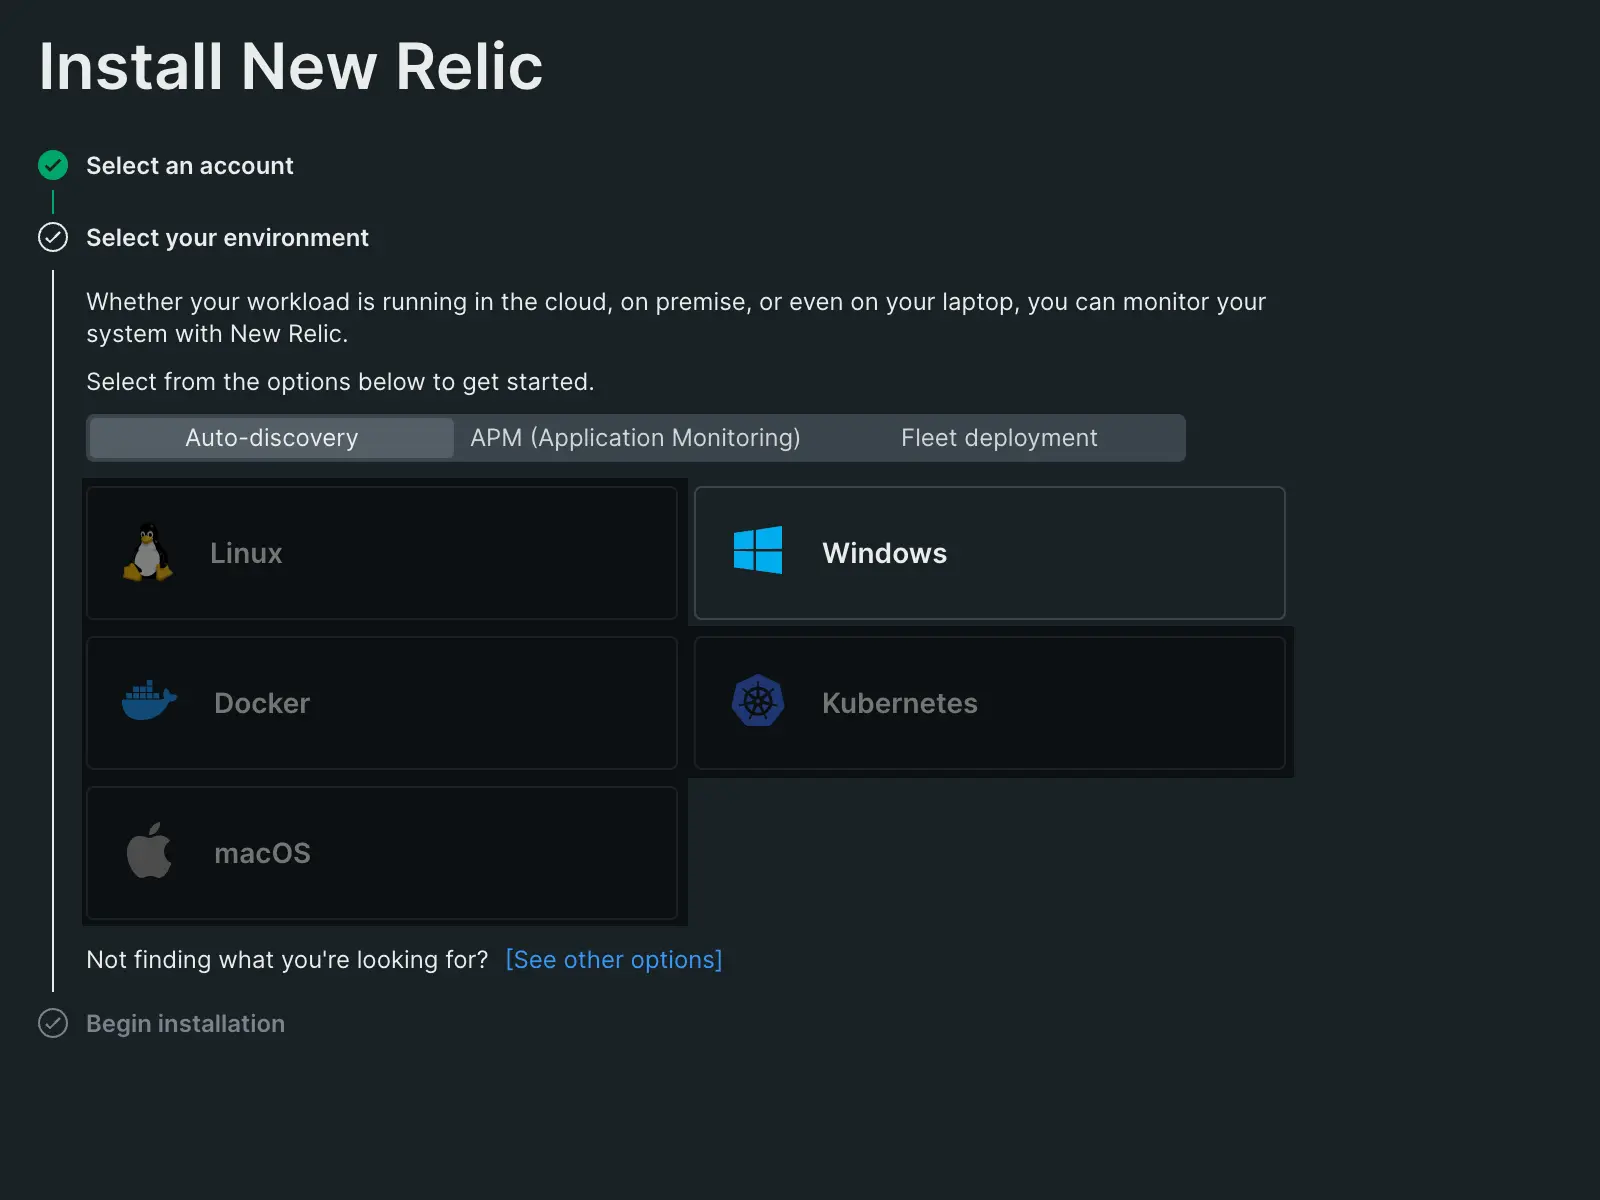 An image displaying New Relic's guided installation for Windows